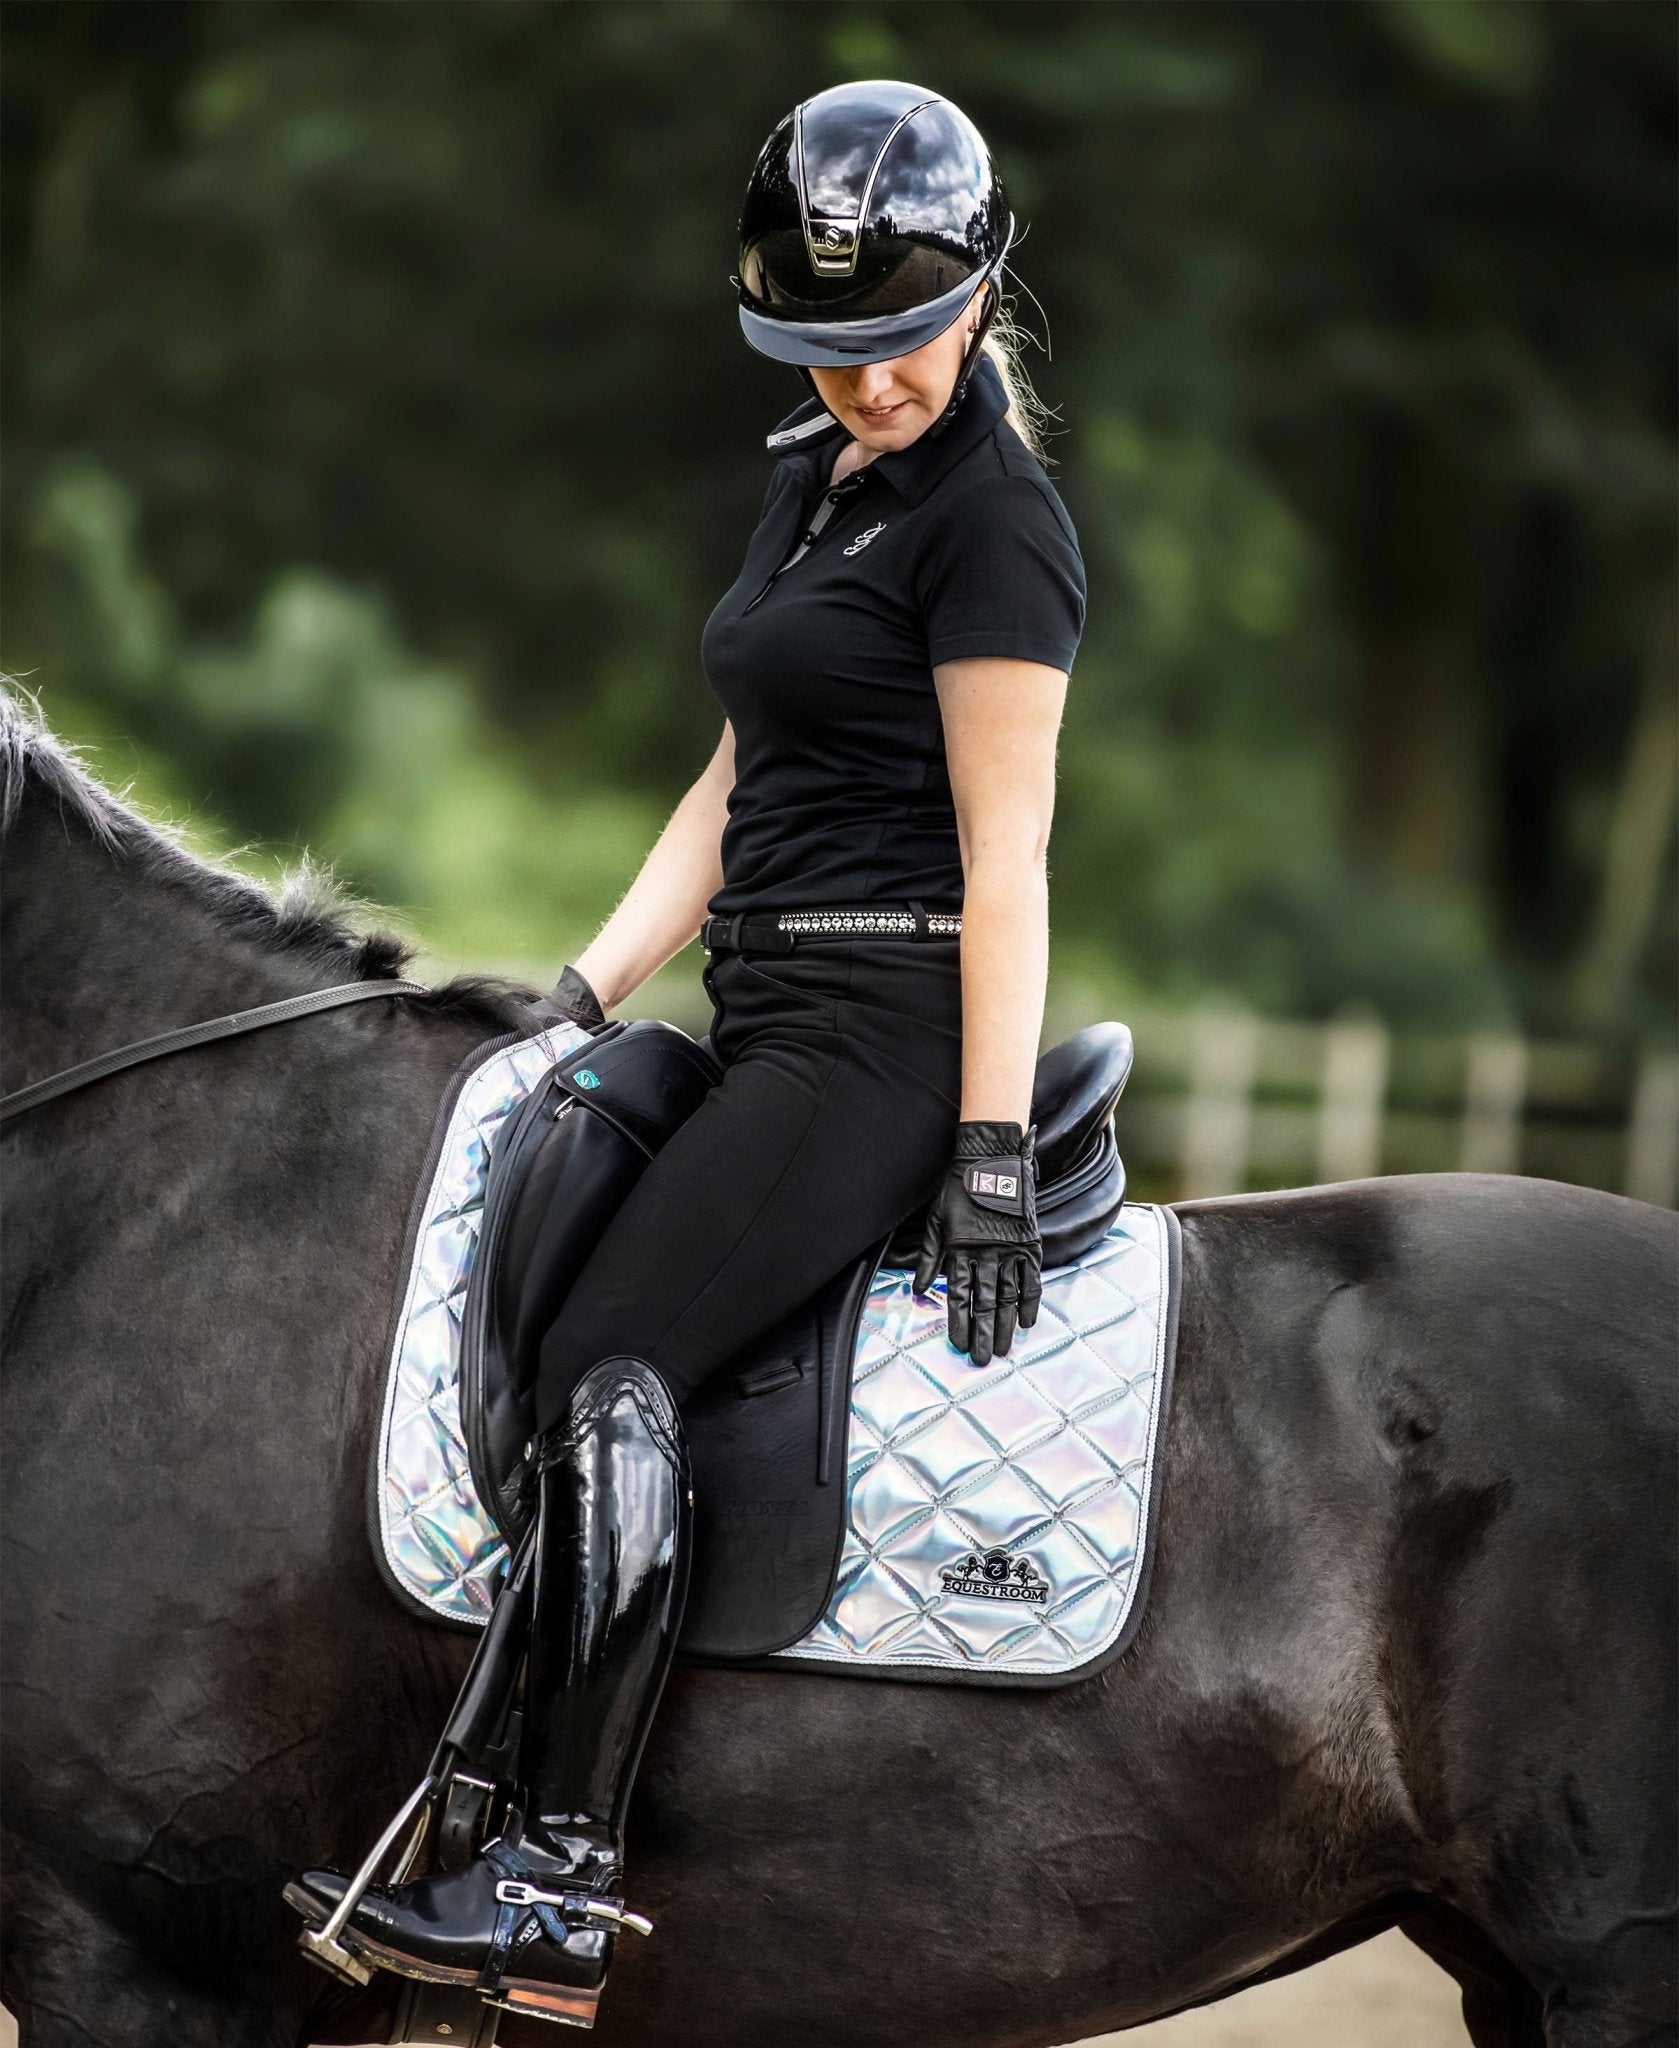 Holographic Saddle Pad - Dressage or Jump - Equiluxe Tack